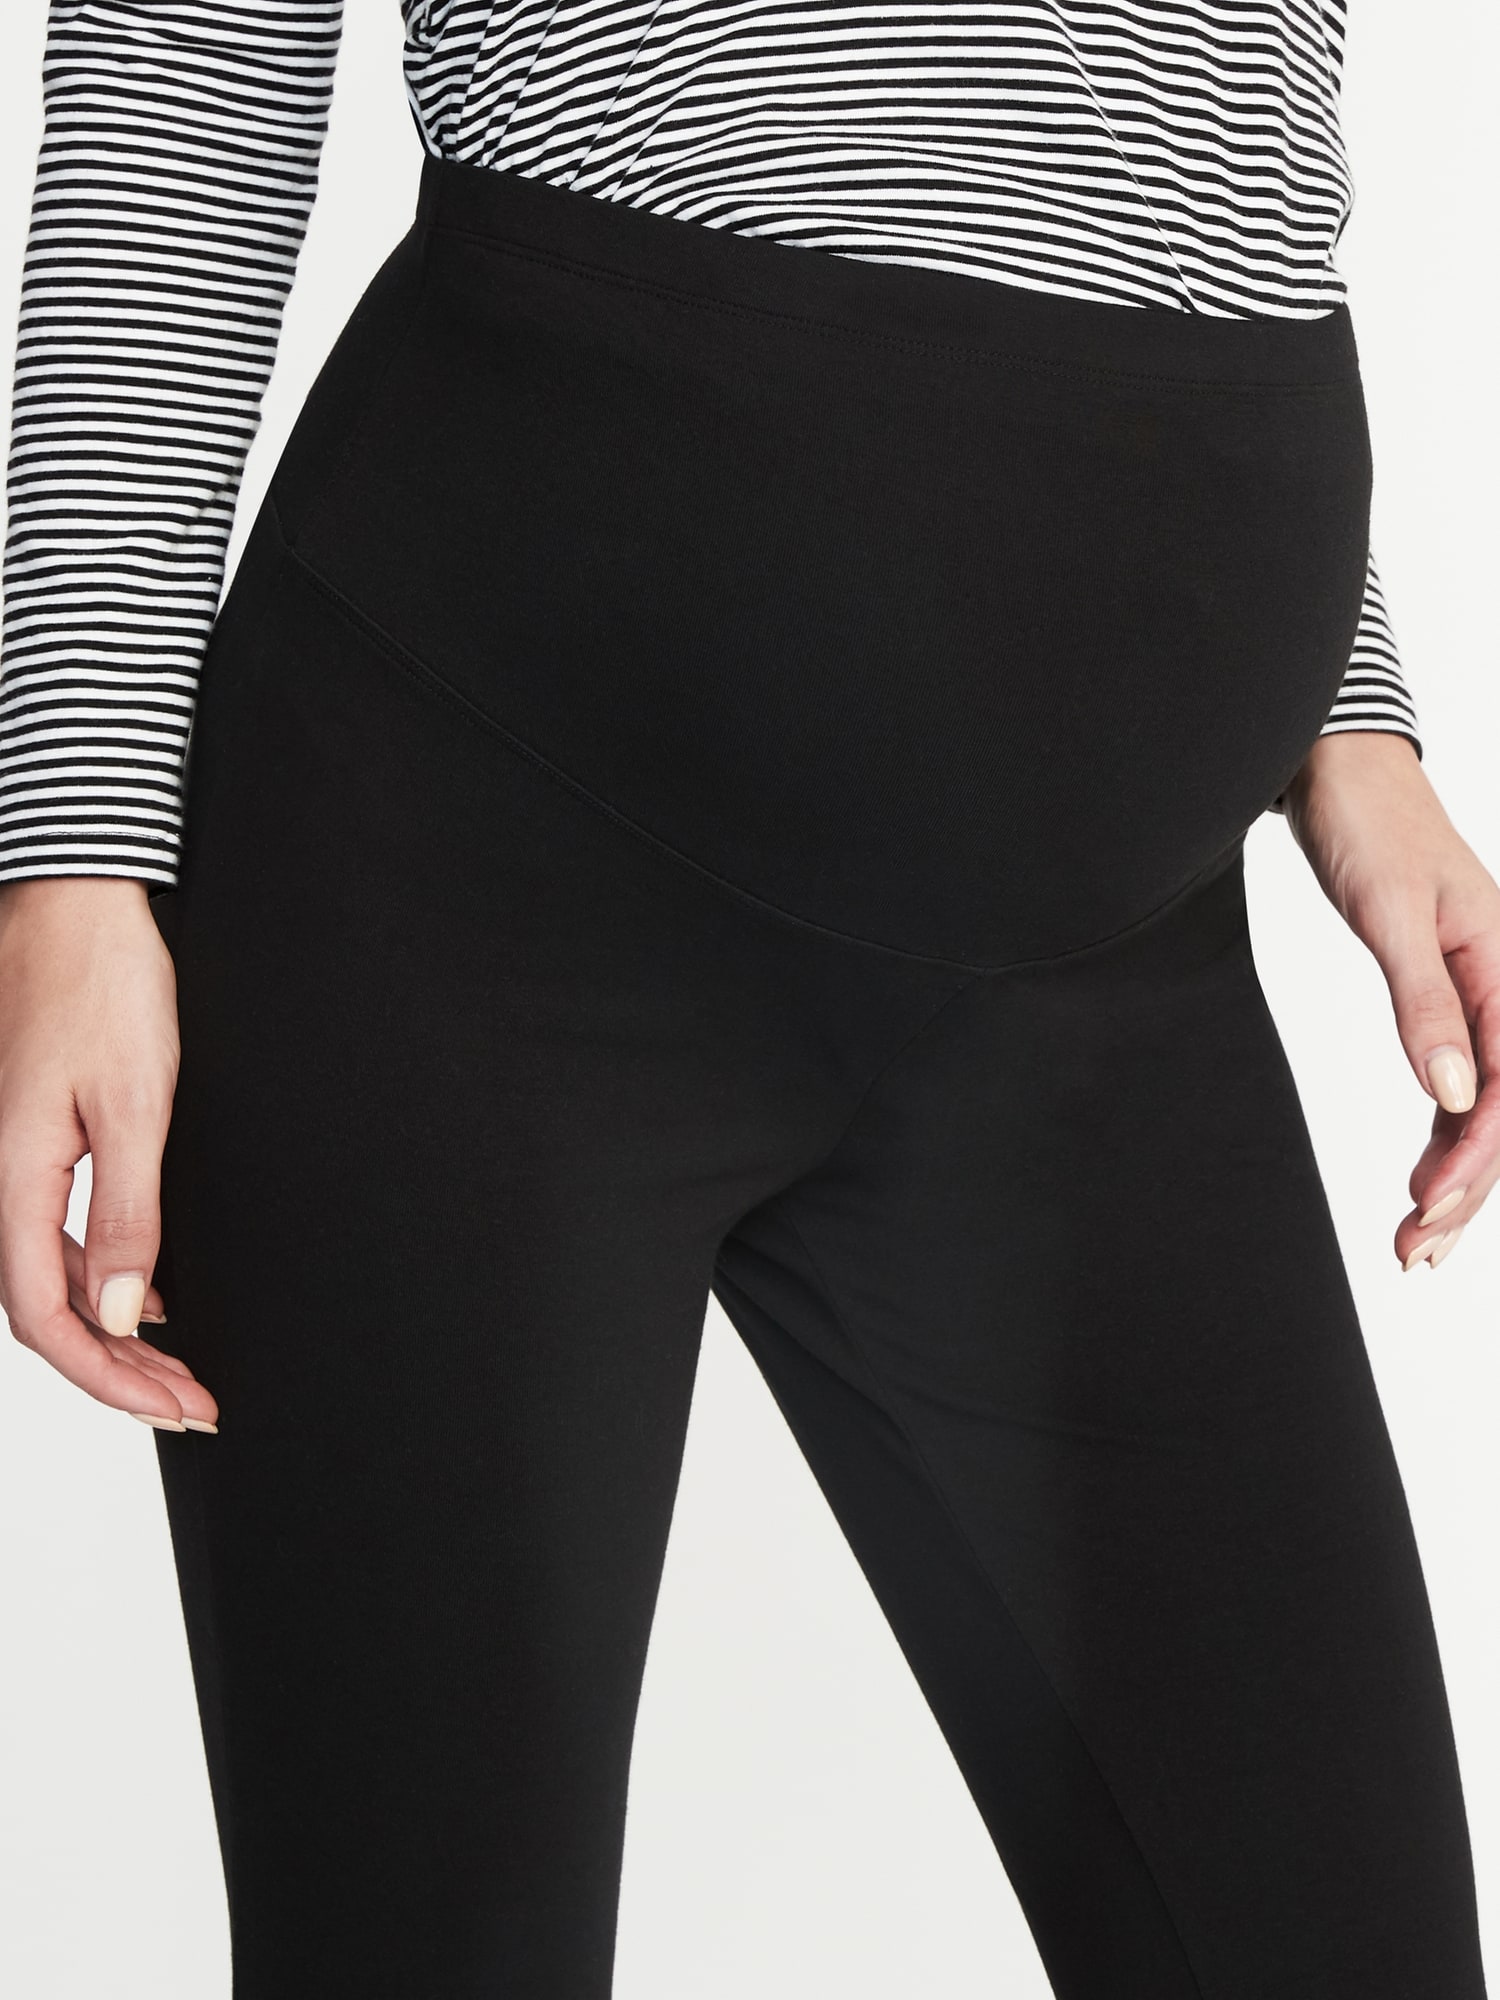 Black NWT XS Old Navy Maternity Front Low-Panel Leggings